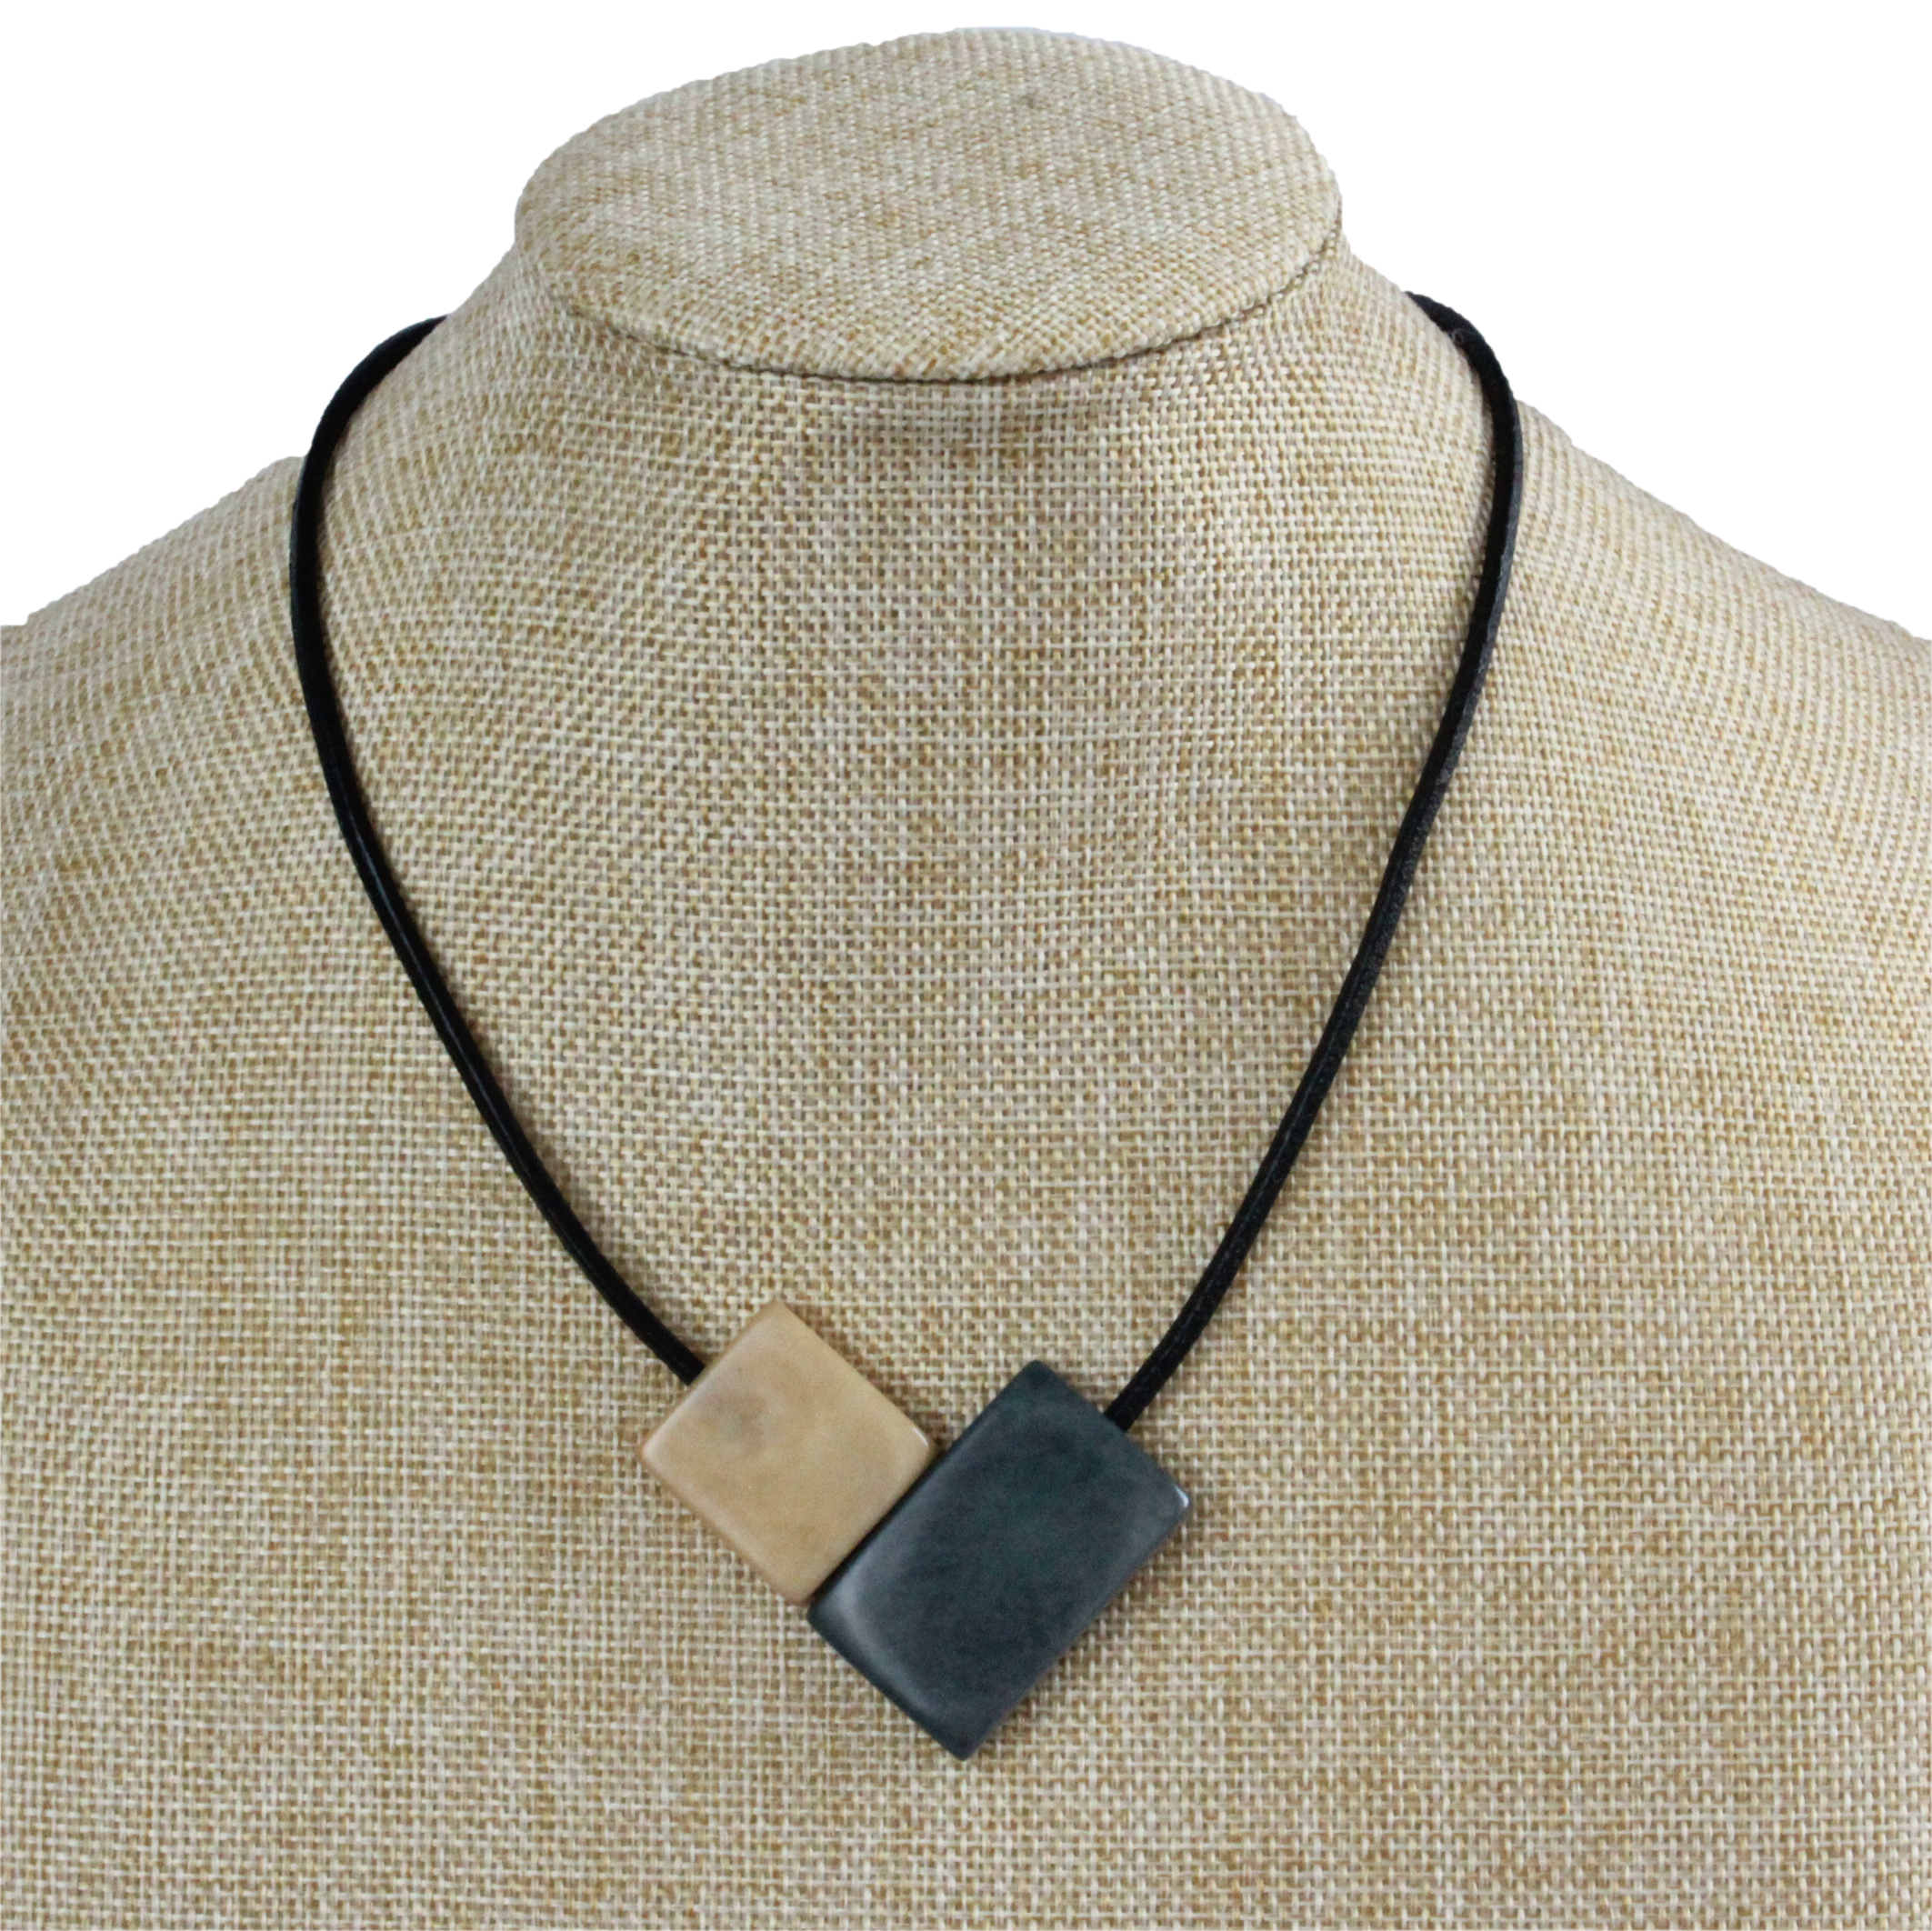 Handmade necklace, sustainable, tagua nut, magnetic lock, grey beige, stand